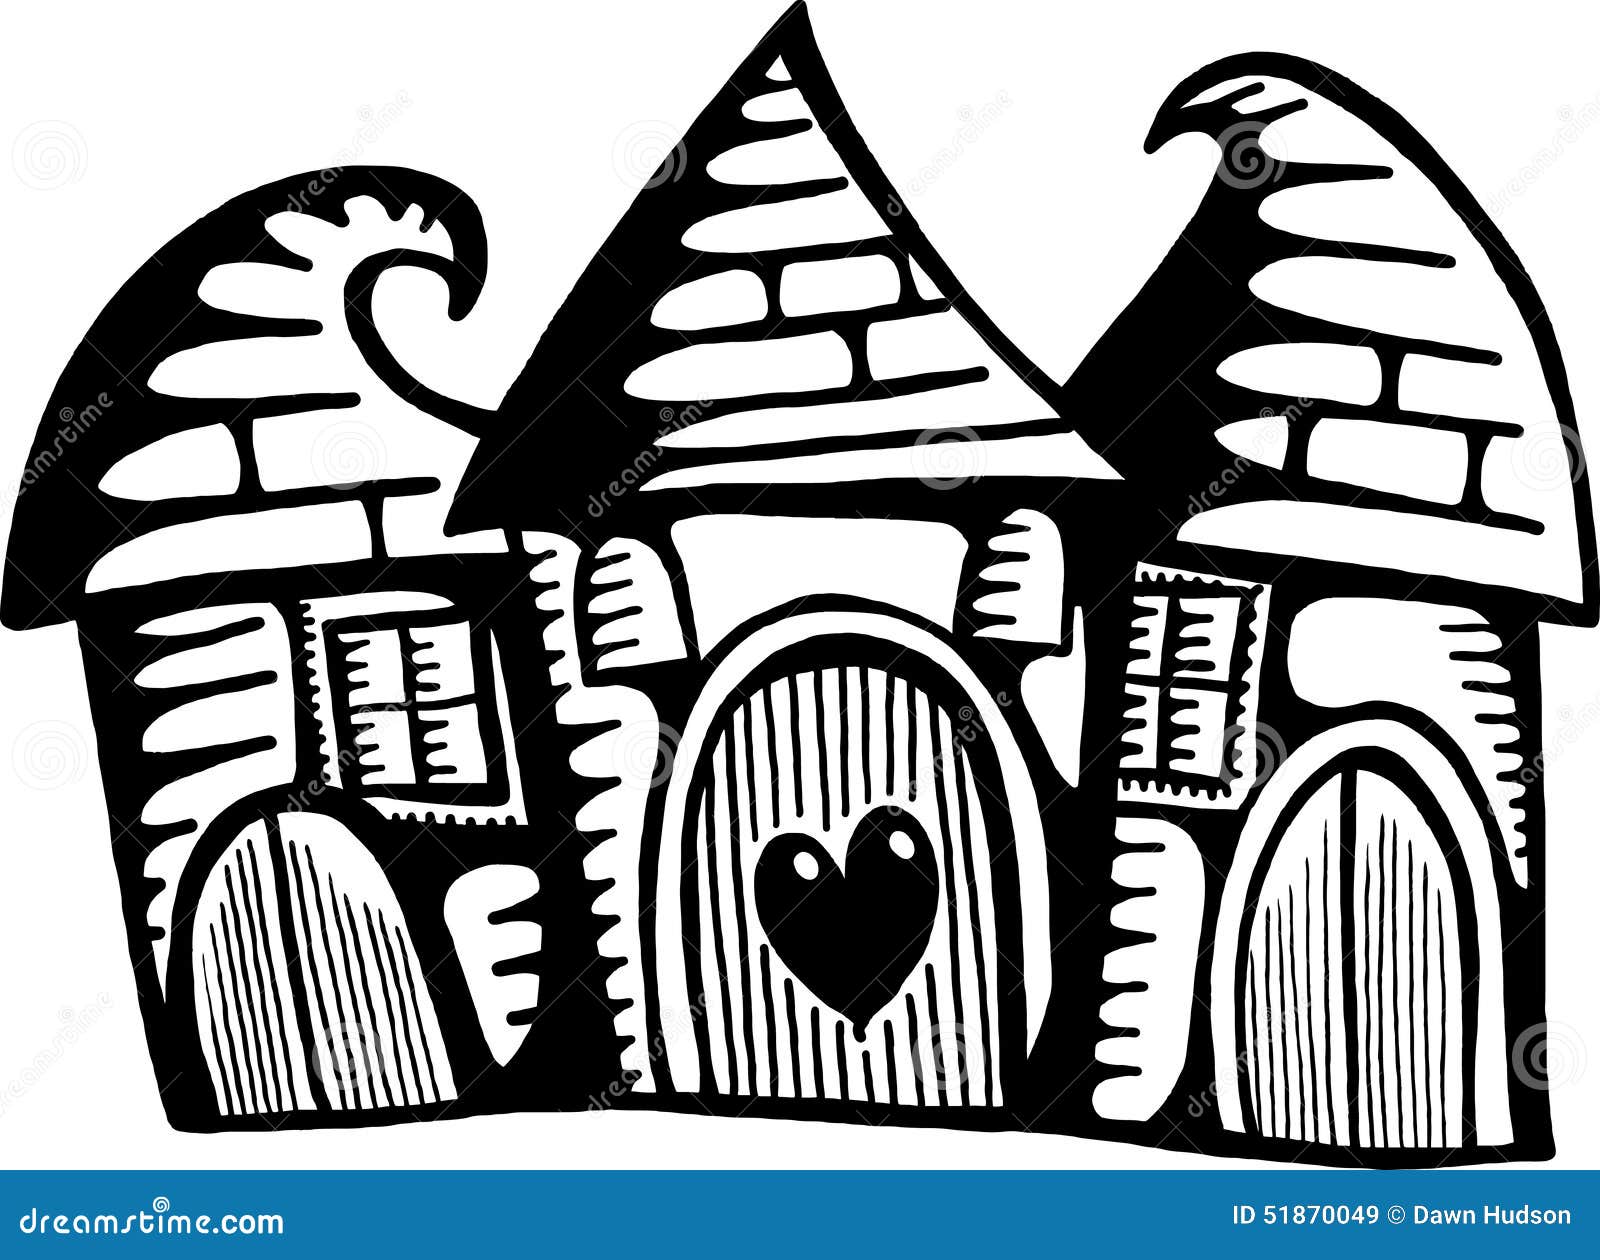 quirky houses coloring pages - photo #34